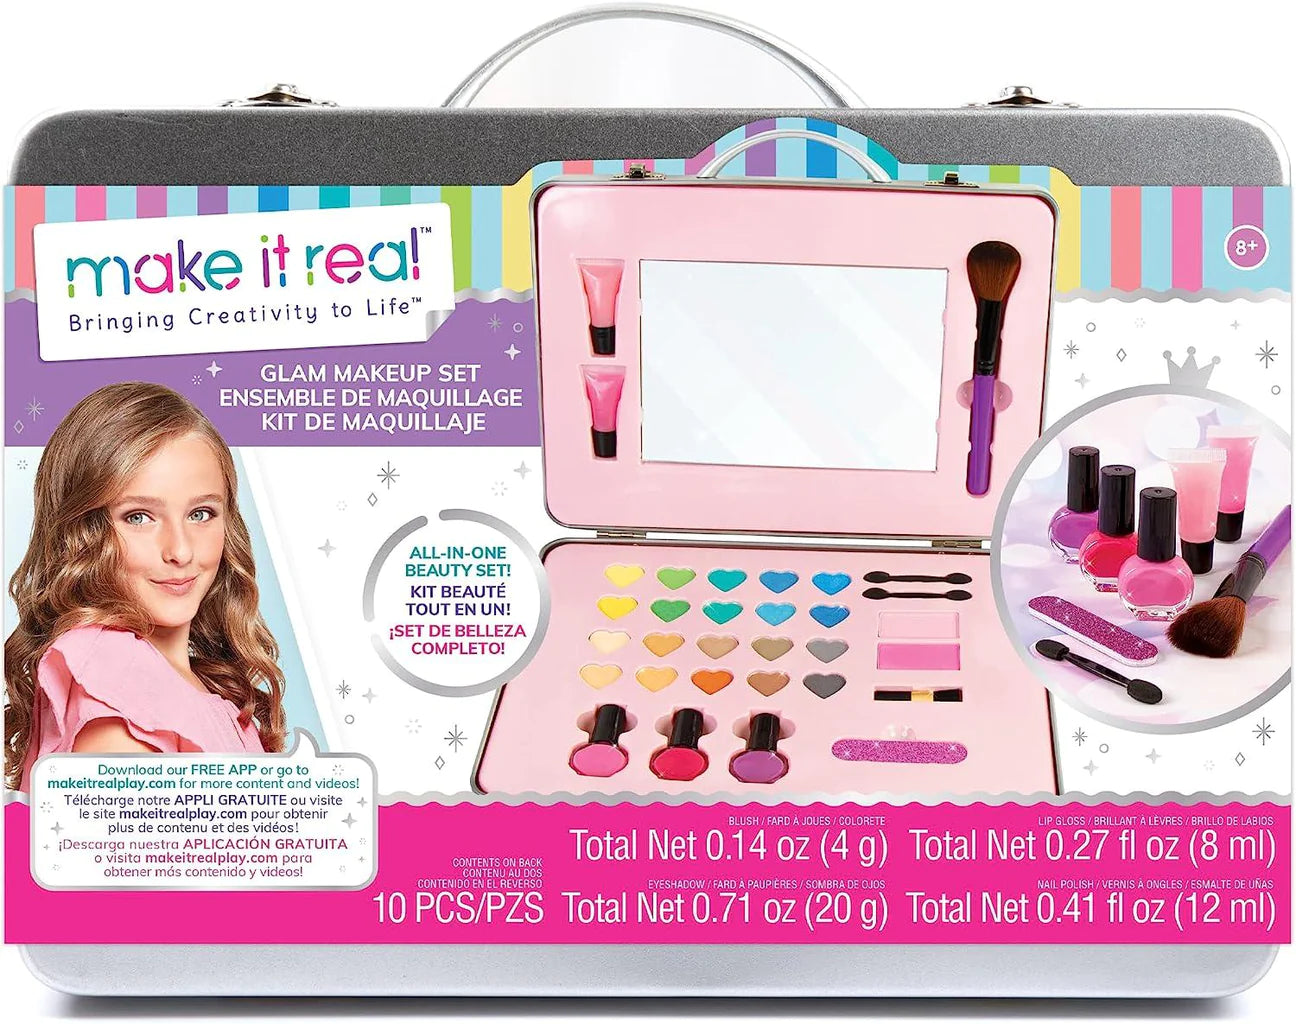 Glam Makeup Set by Make It Real #2506